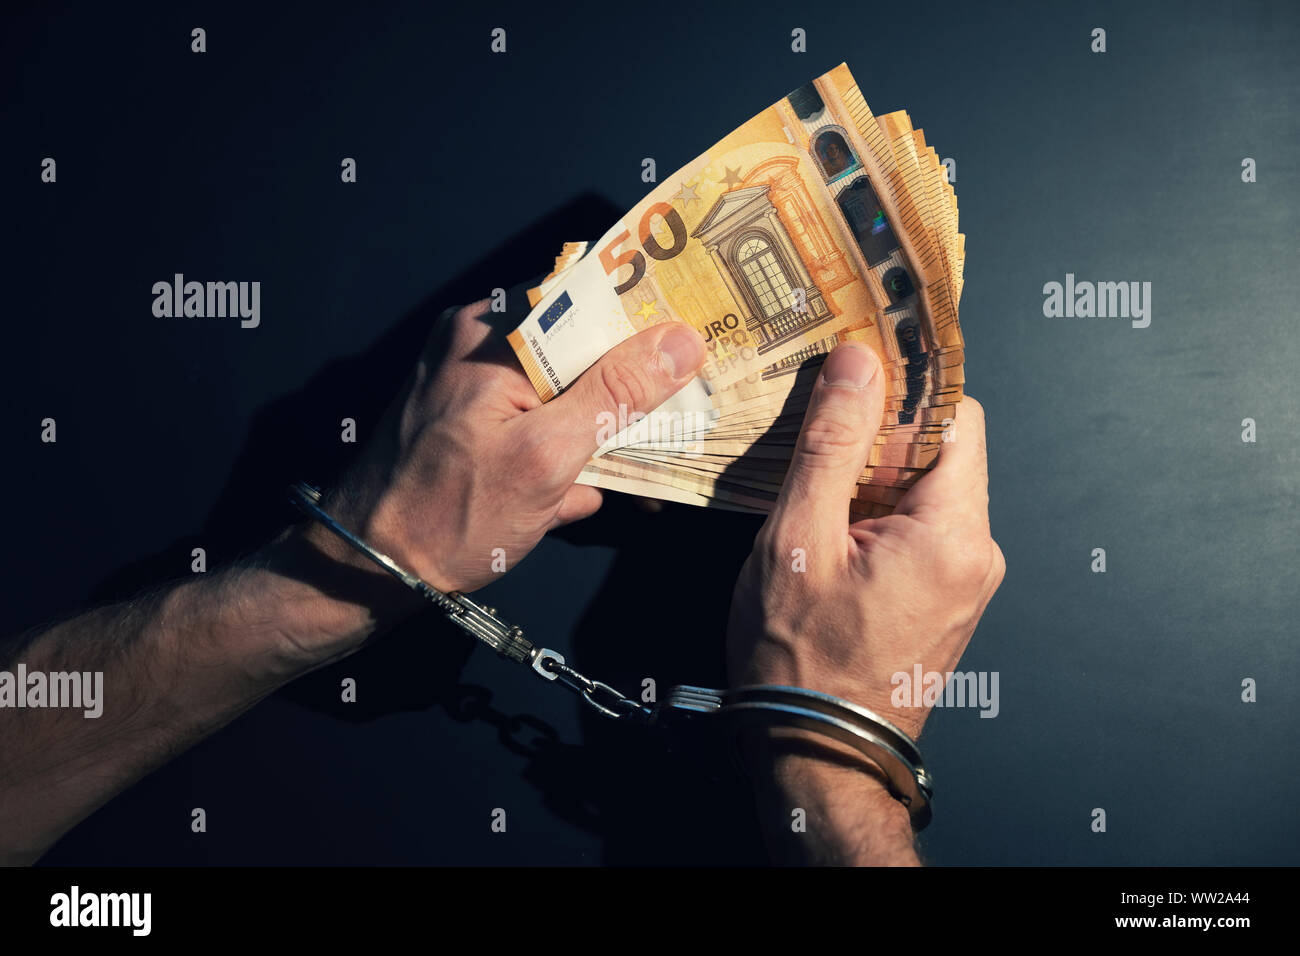 financial crime concept - cuffed hands with cash money Stock Photo